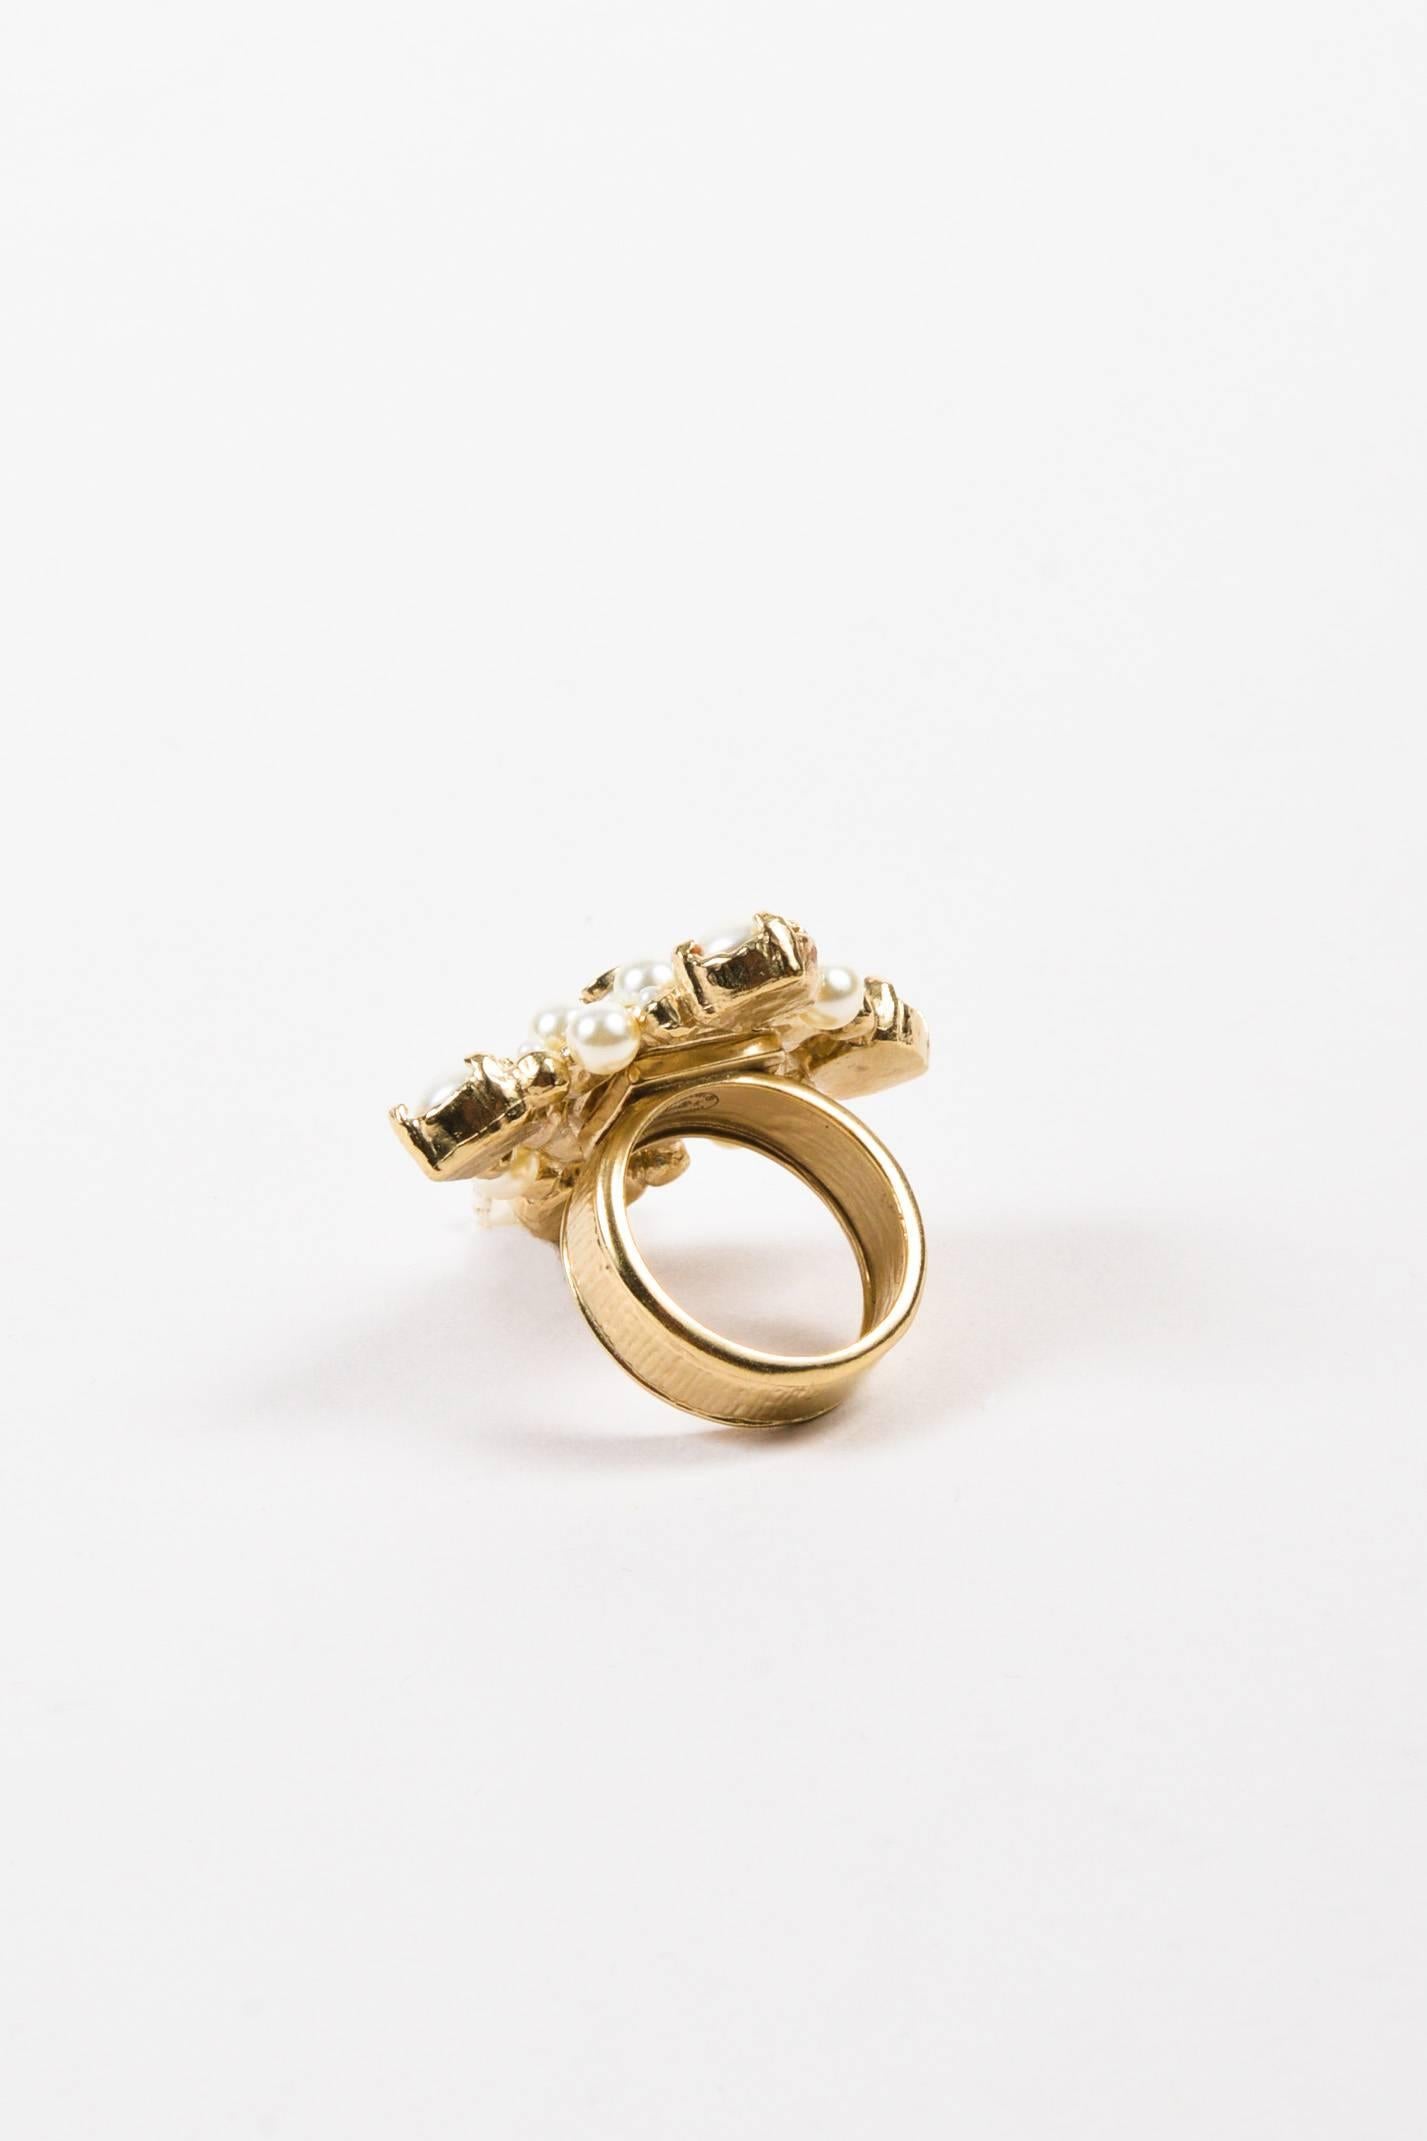 Chanel 2014 Gold Tone Faux Pearl 'CC' Logo Diamond Shaped Cocktail Ring SZ 6 In Excellent Condition For Sale In Chicago, IL